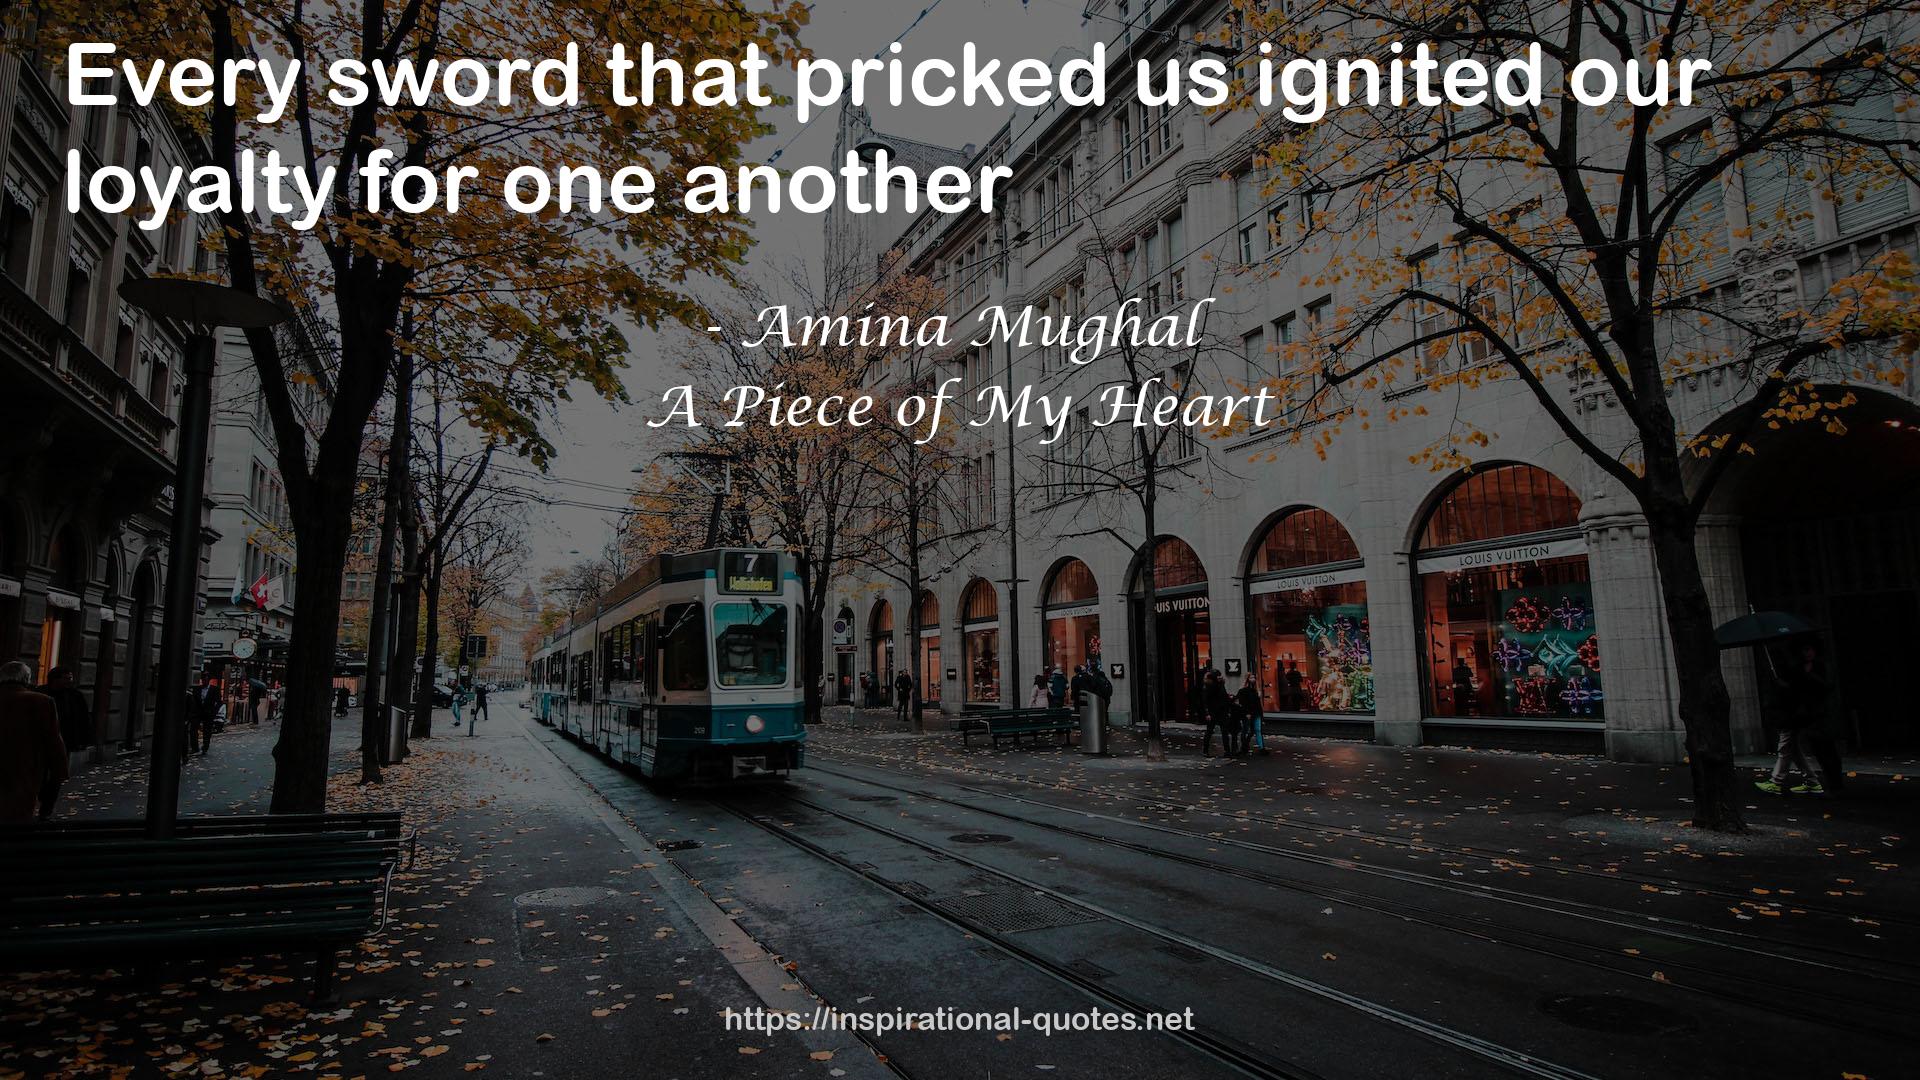 A Piece of My Heart QUOTES